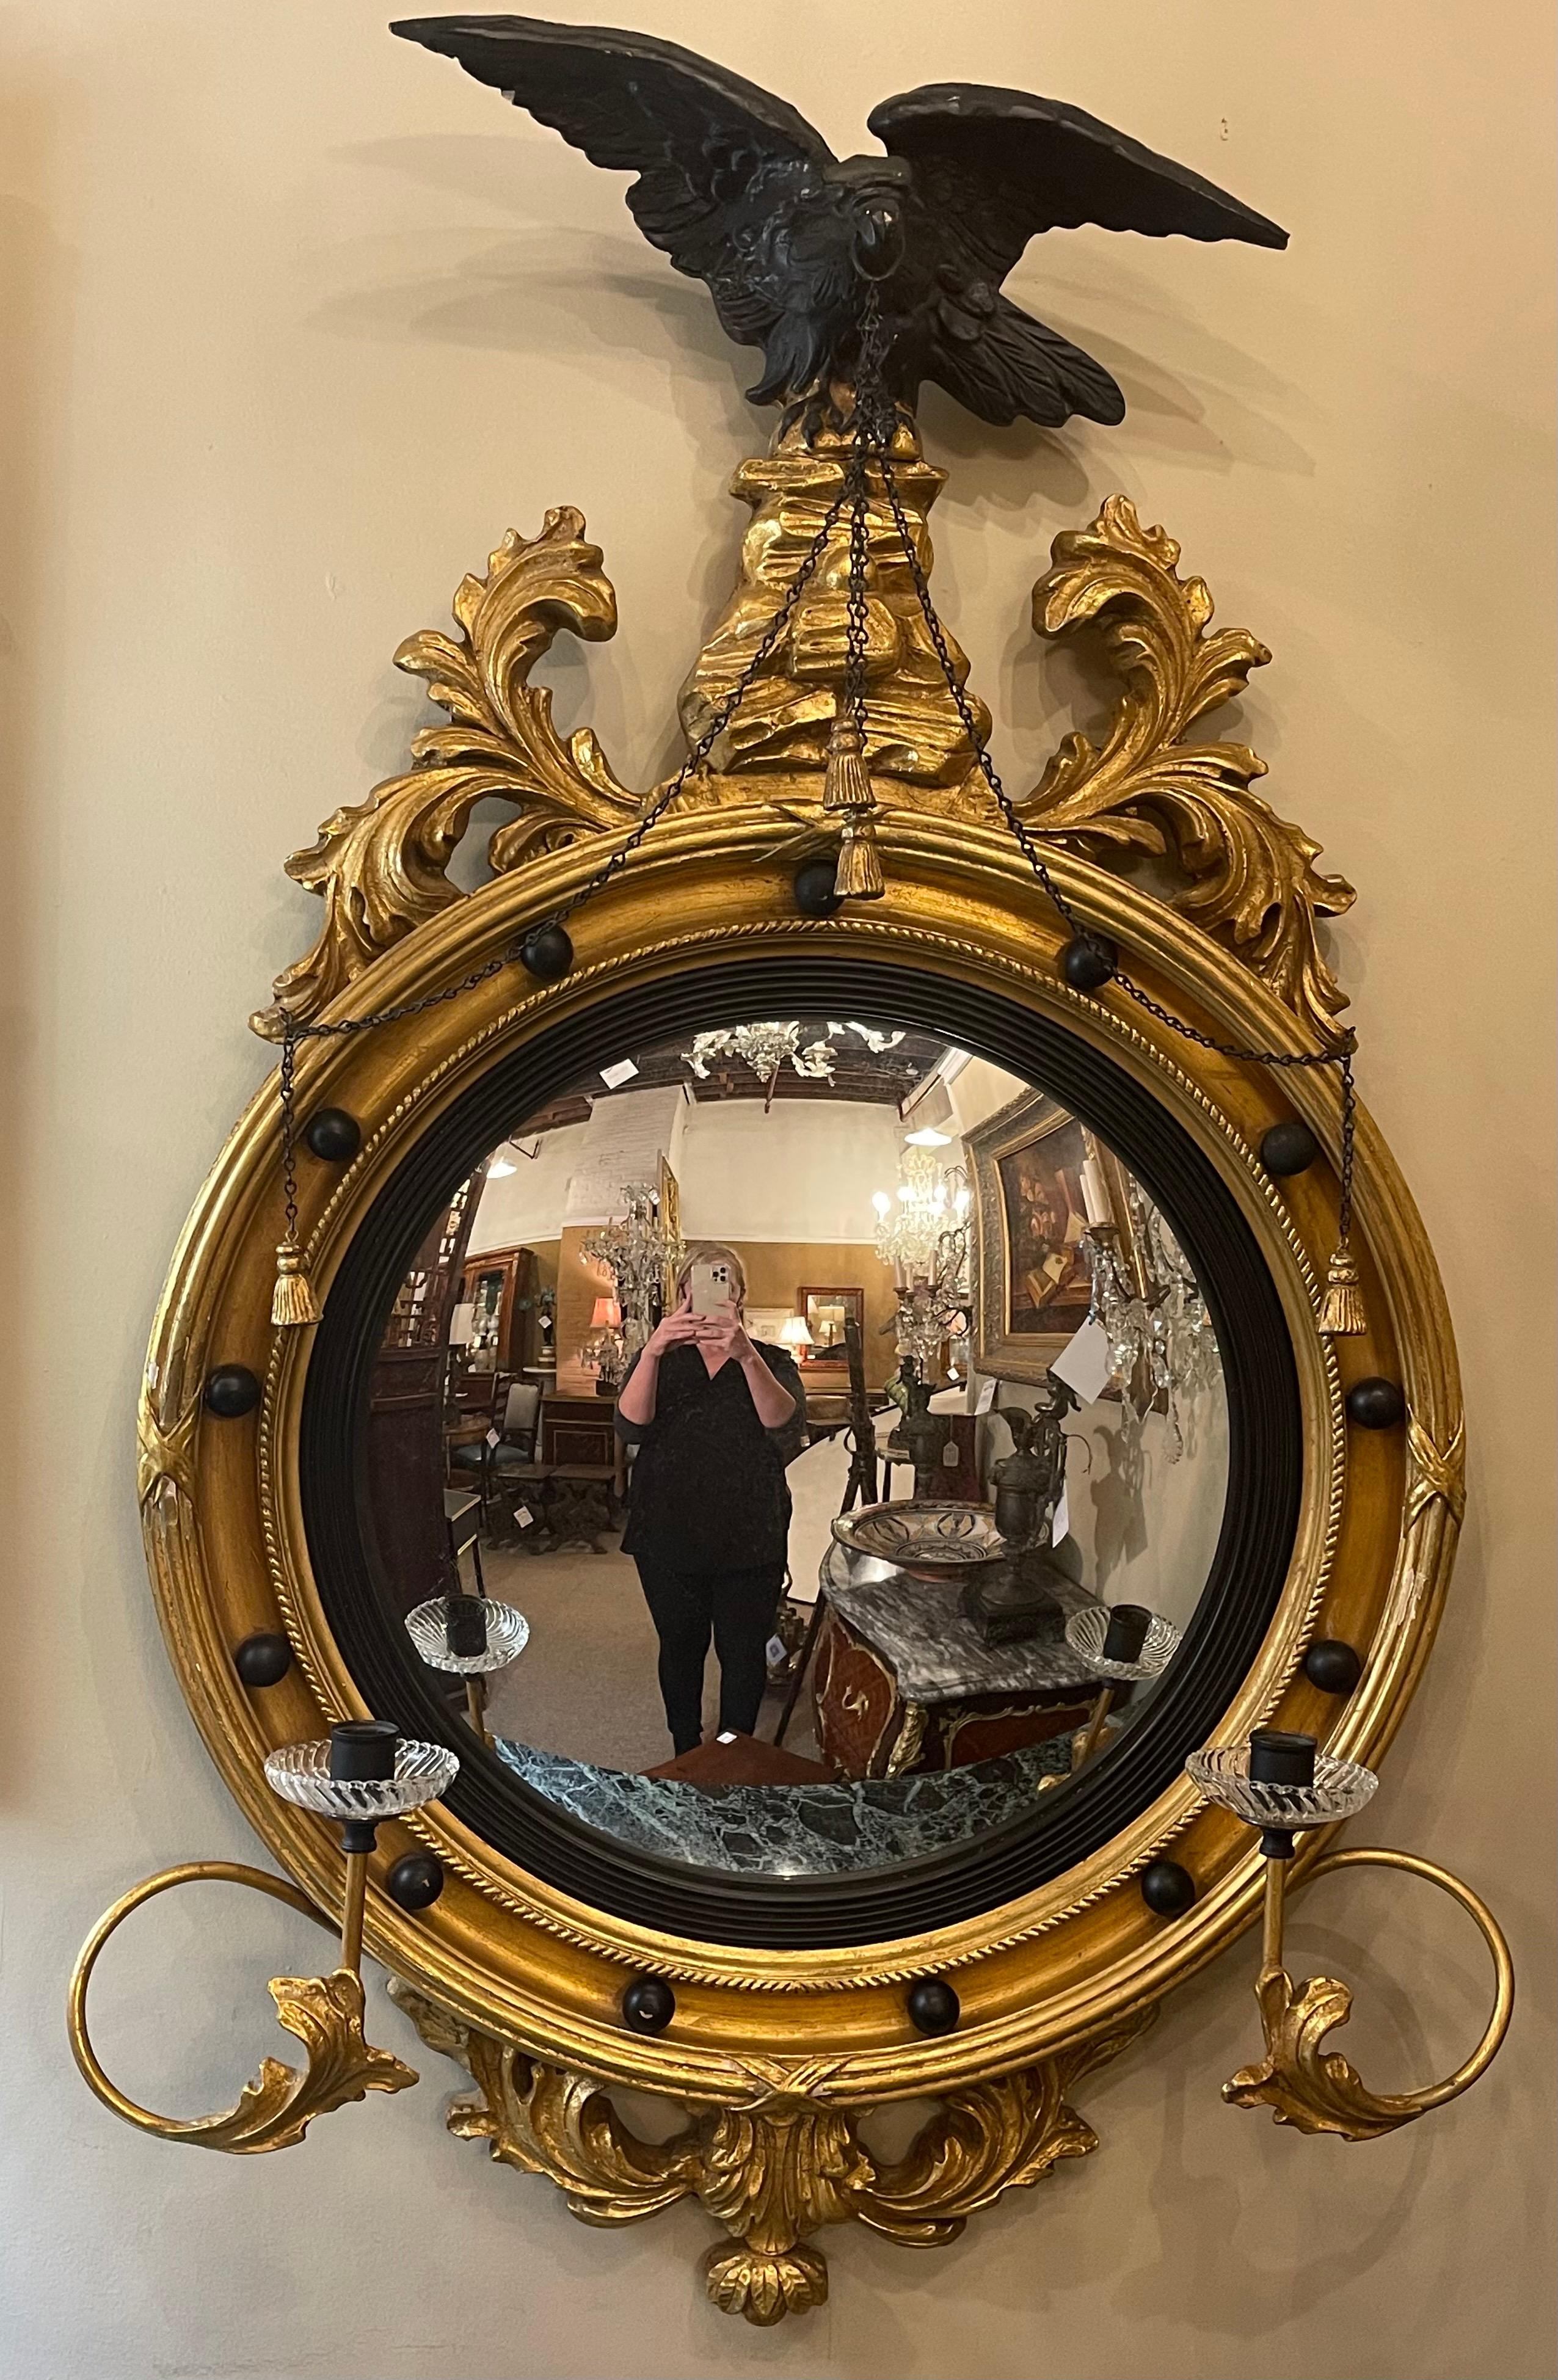 Federal convex bullseye wall mirror, 19th-20th century. A finely carved winged eagle perched above a wonderfully carved wall or console mirror. The candlestick arms having crystal boboches. The whole ebony and gilt gold decorated.